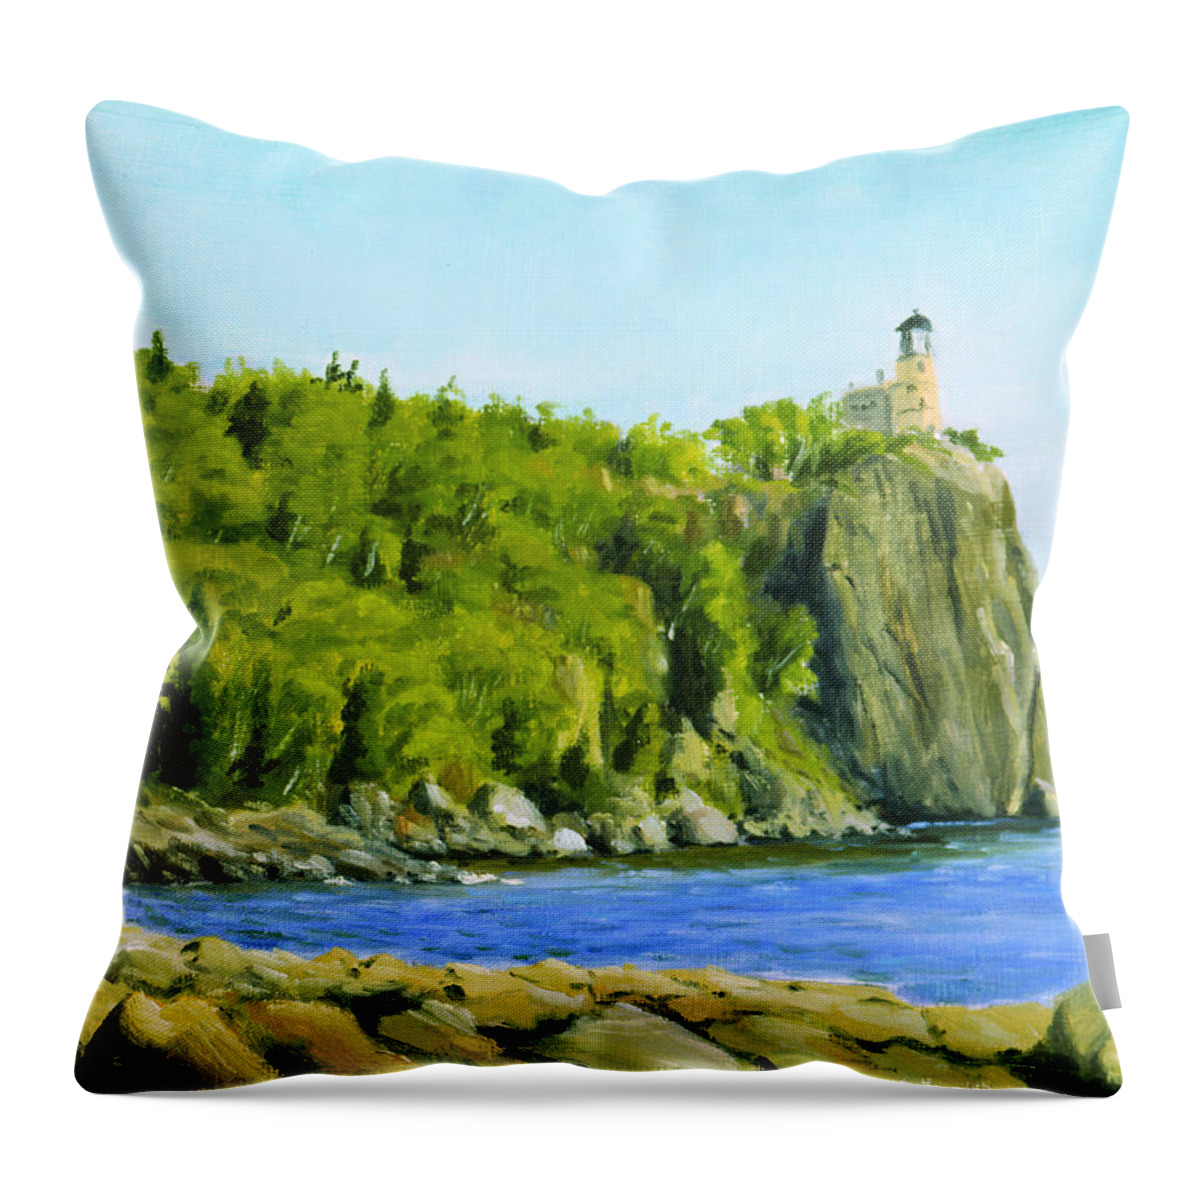 Landscape Throw Pillow featuring the painting SplitRock by Rick Hansen